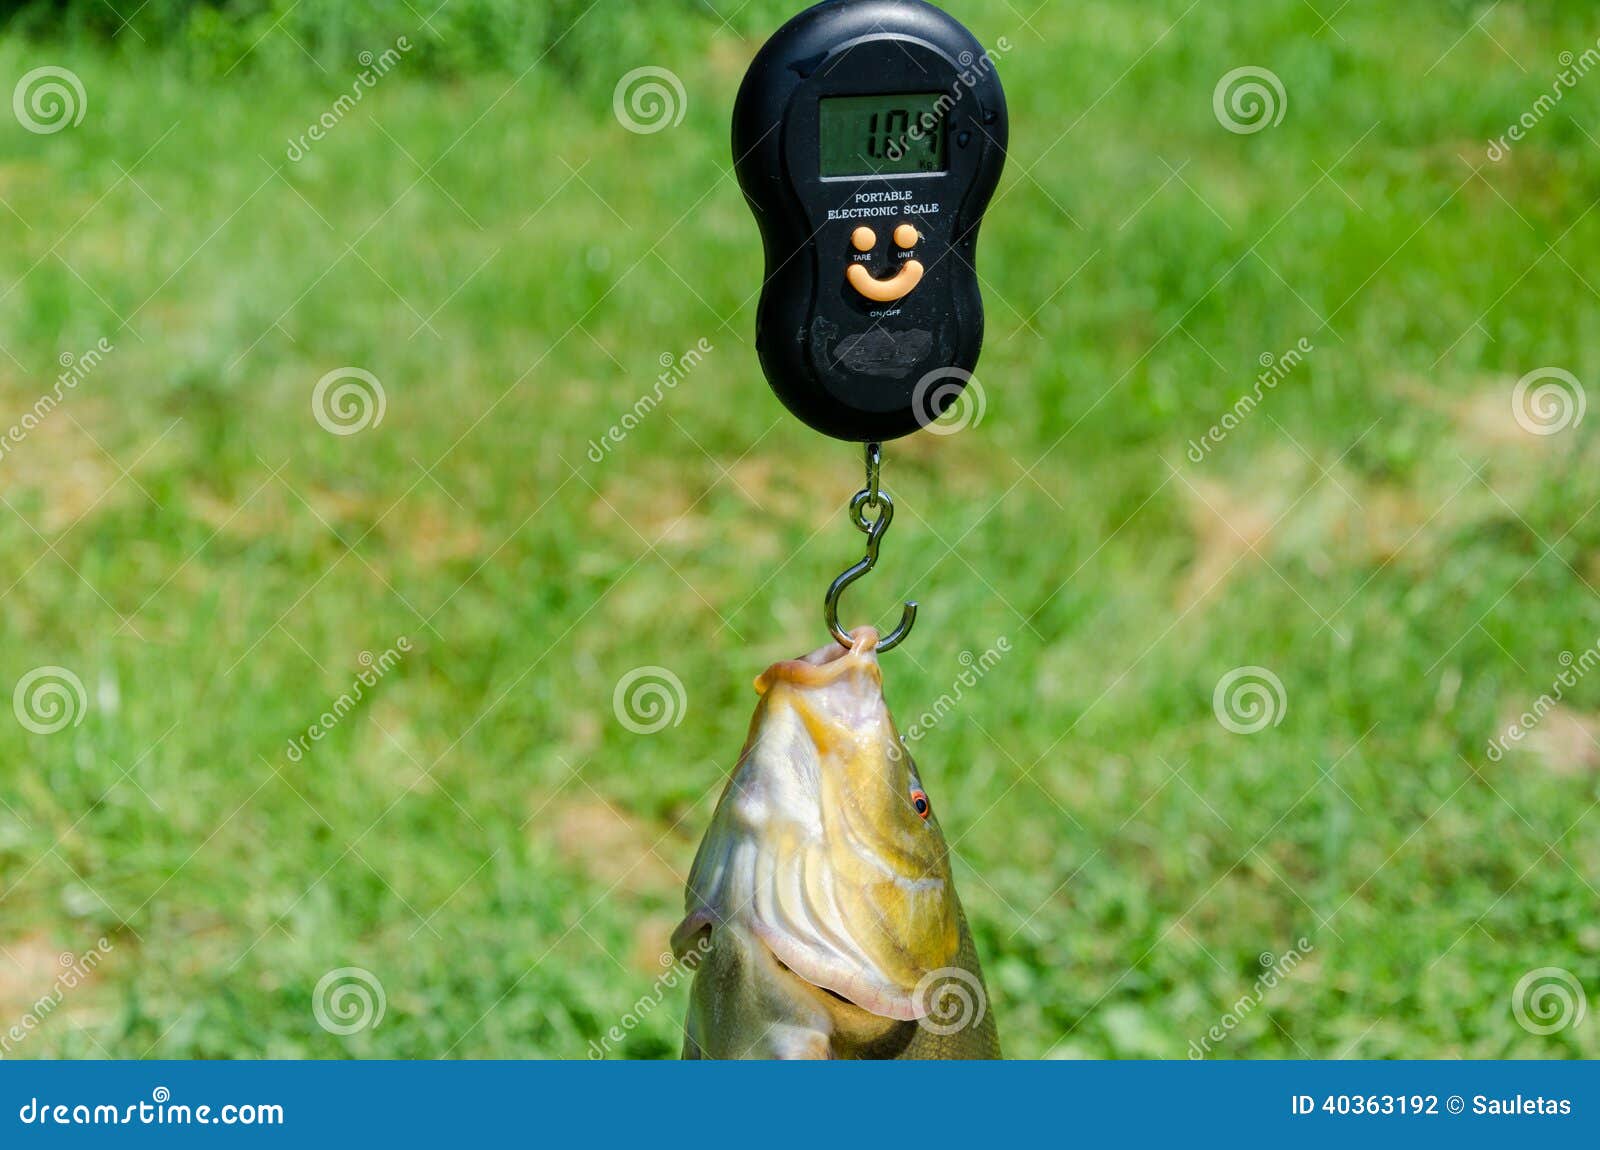 https://thumbs.dreamstime.com/z/closeup-weights-shiny-big-tench-fish-weight-scale-40363192.jpg